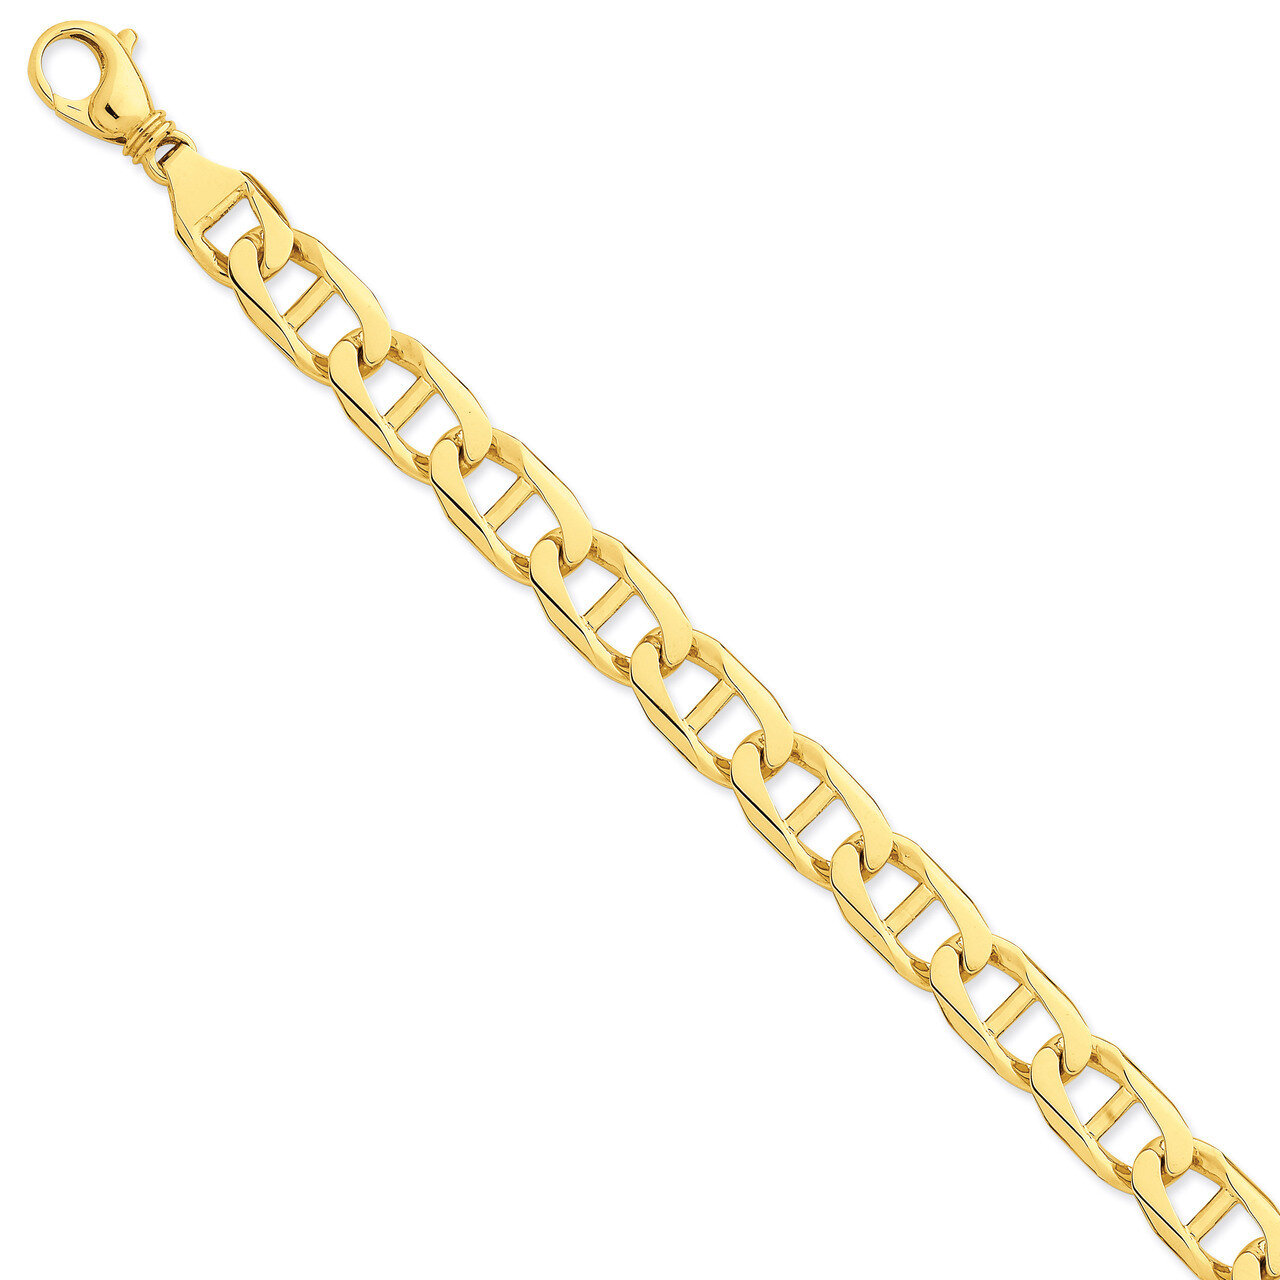 11mm Hand-Polished Anchor Link Chain 9 Inch 14k Gold LK102-9